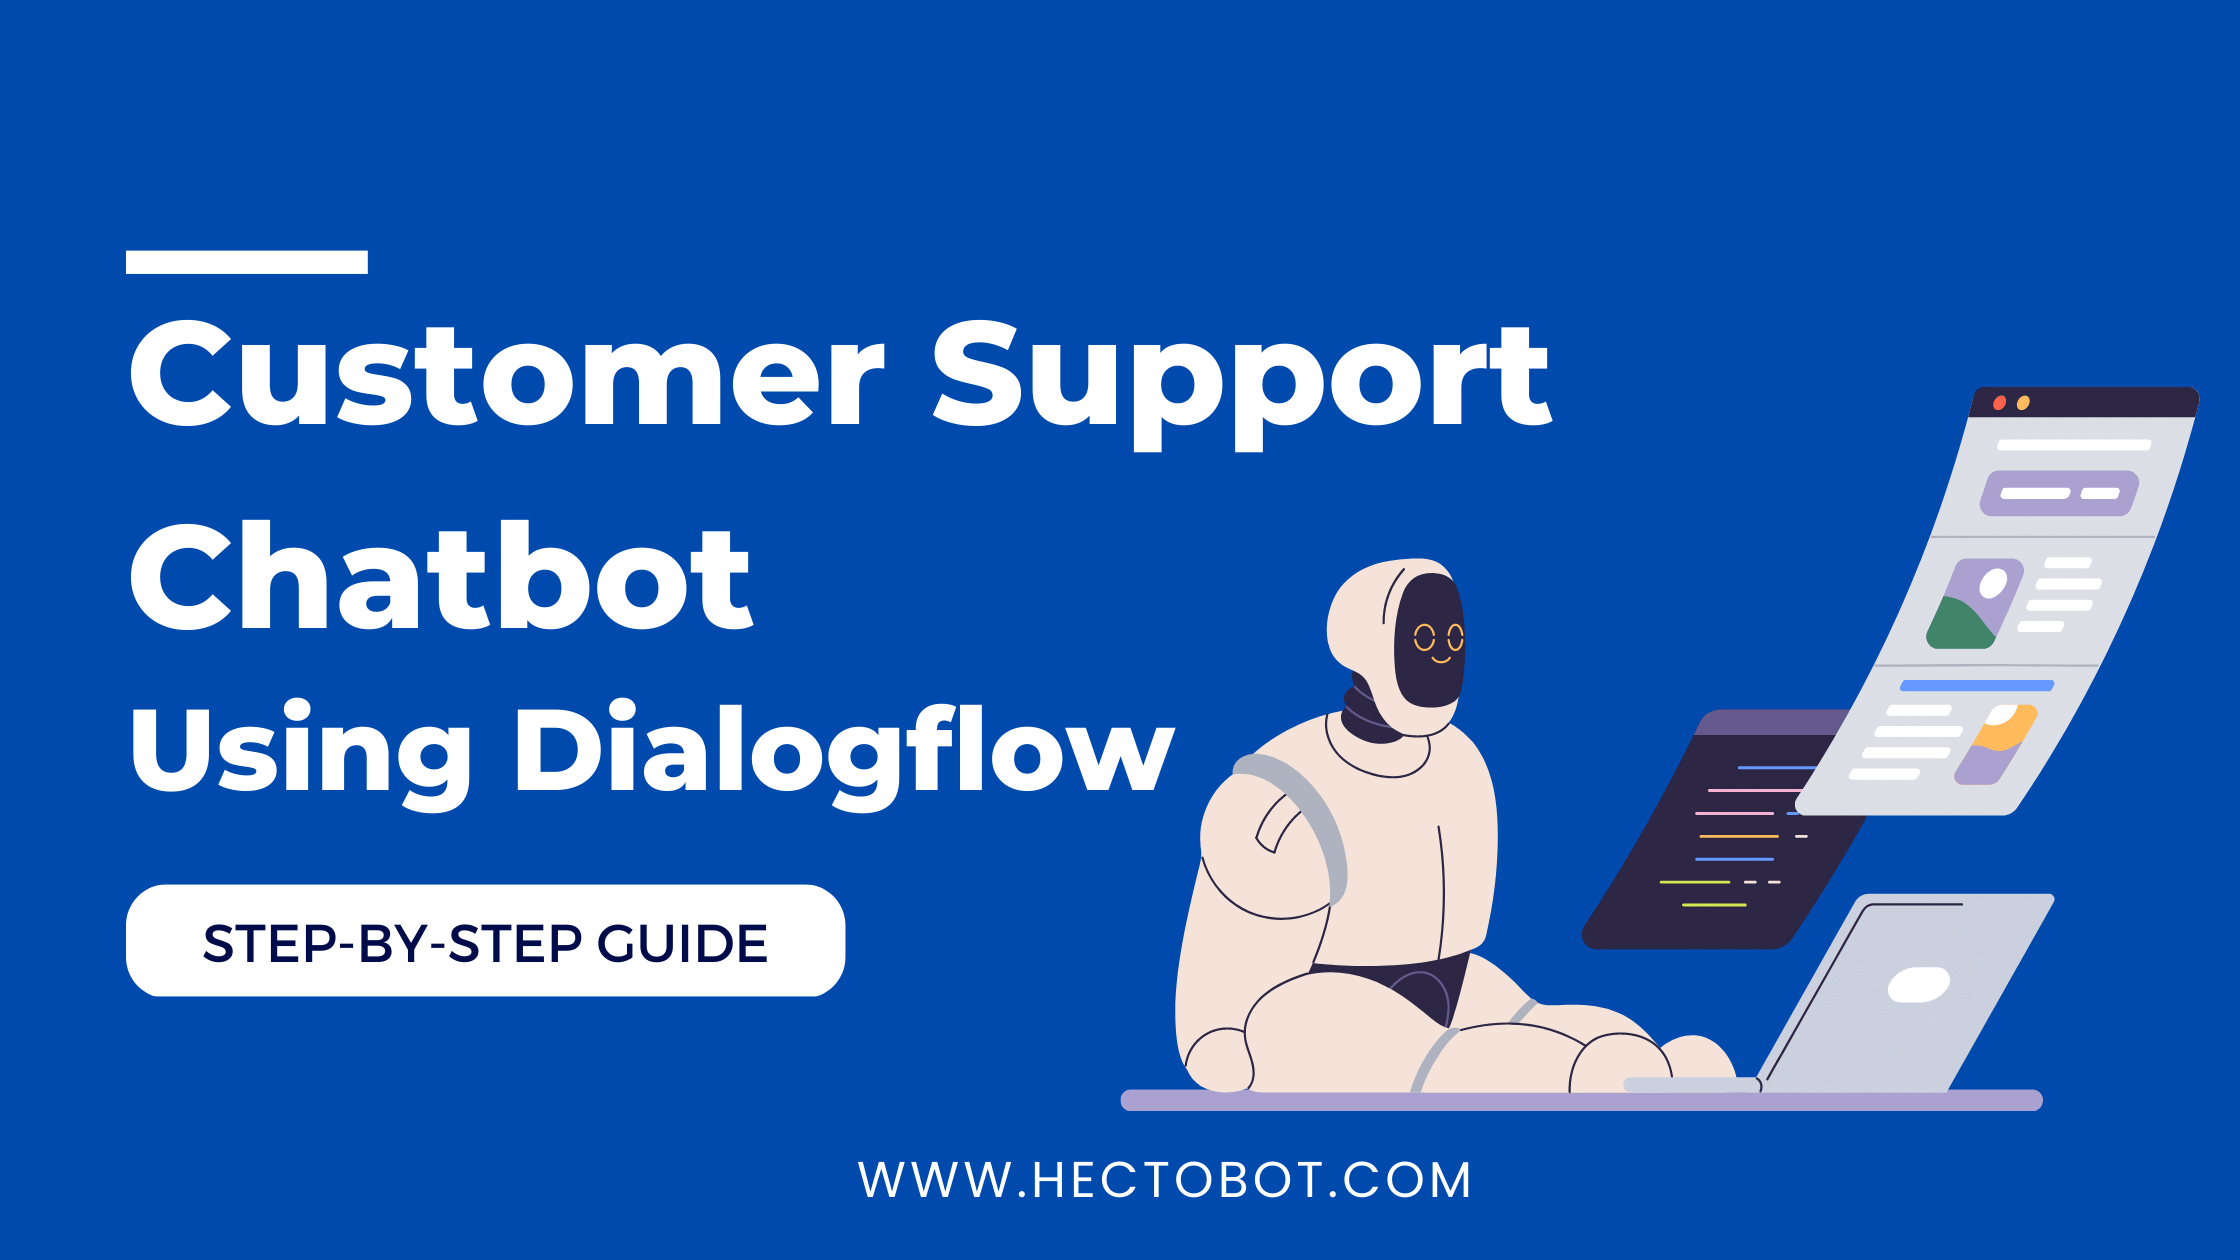 Customer Support Chatbot Using Dialogflow